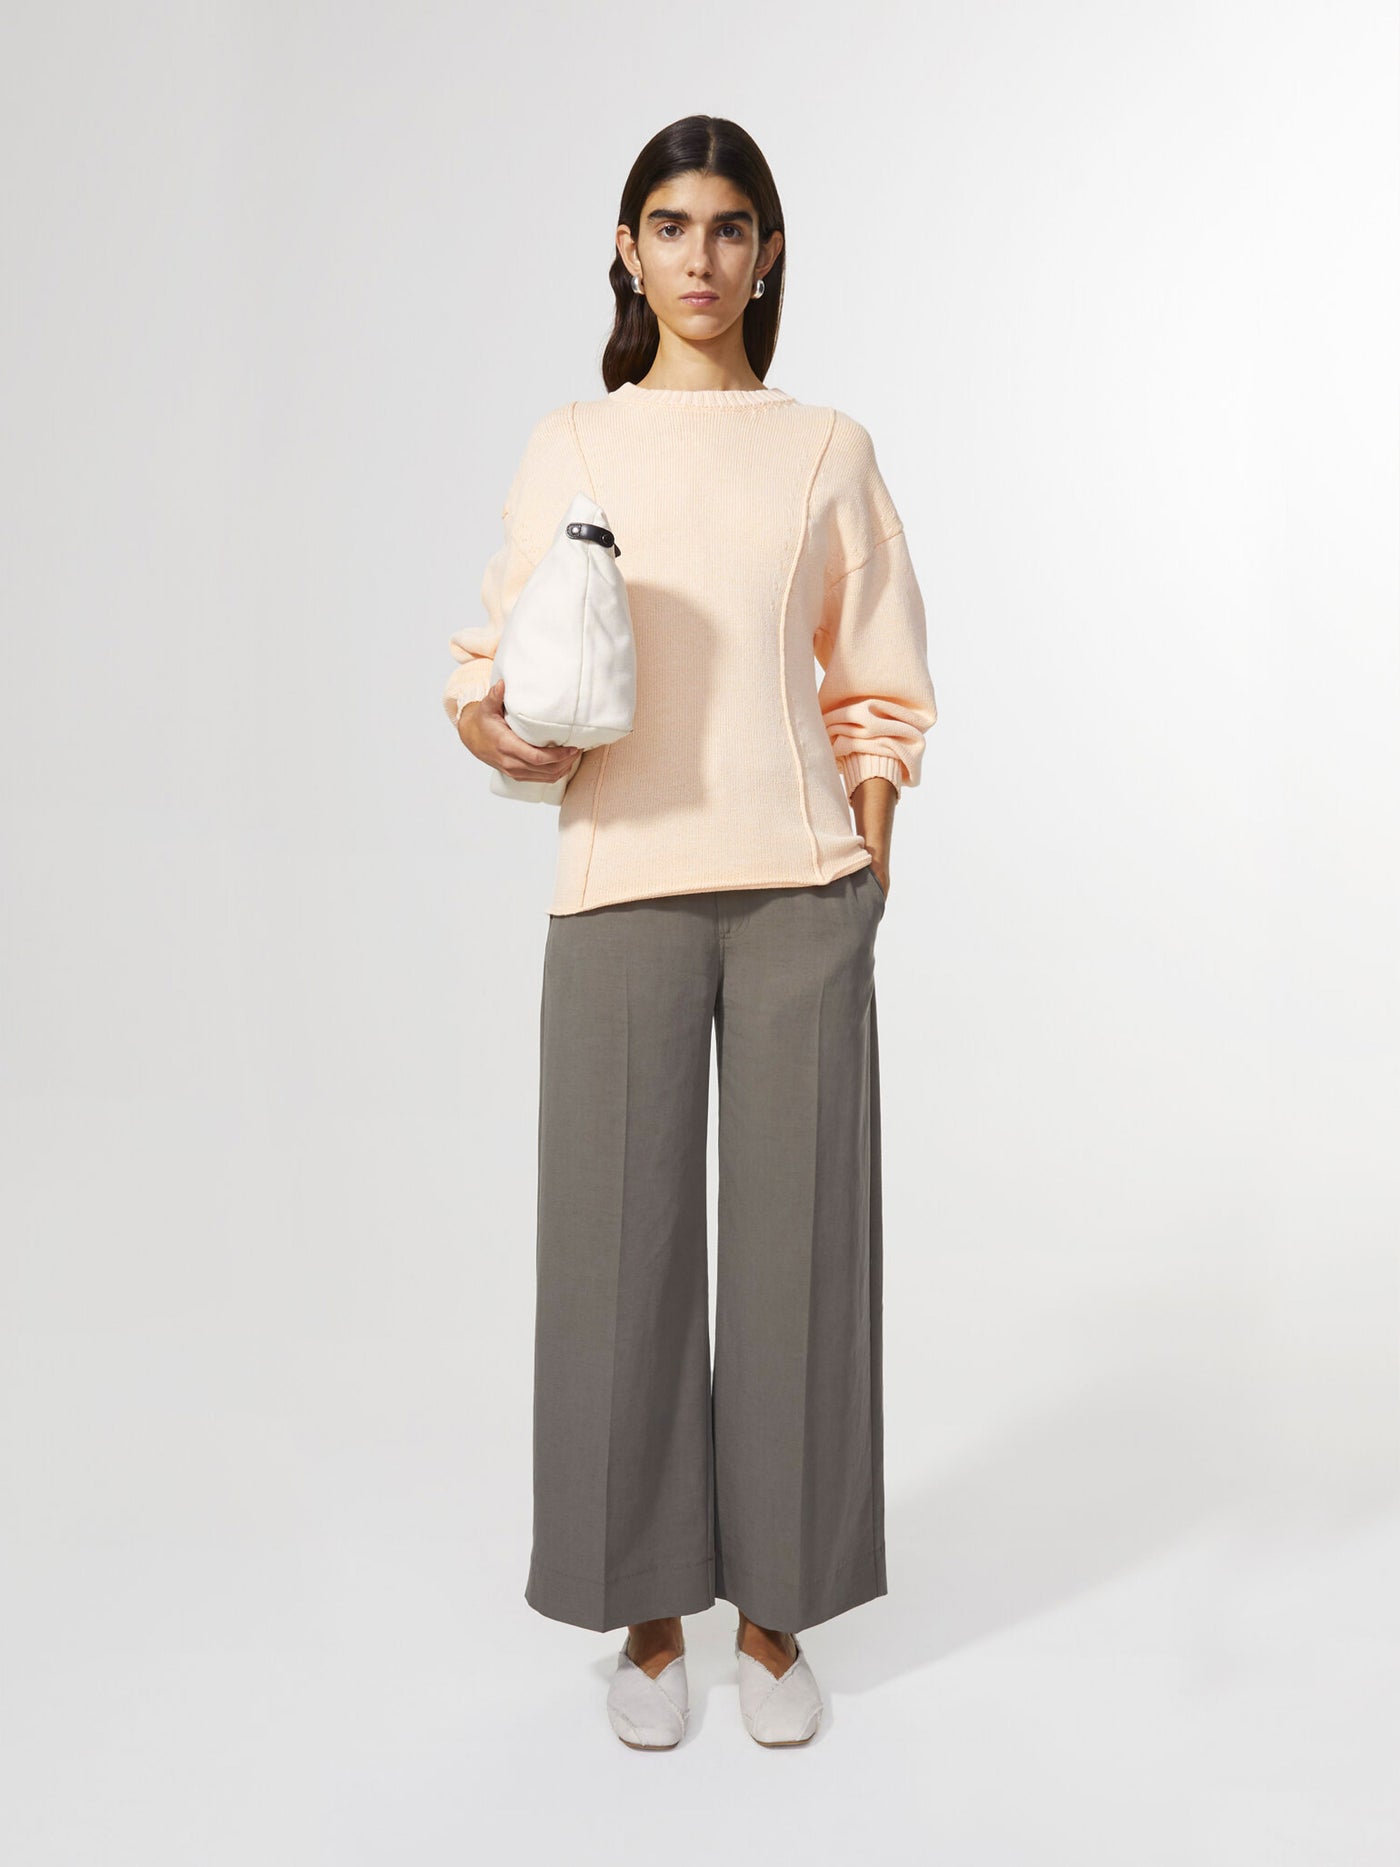 Taylor knitted sweater, peach